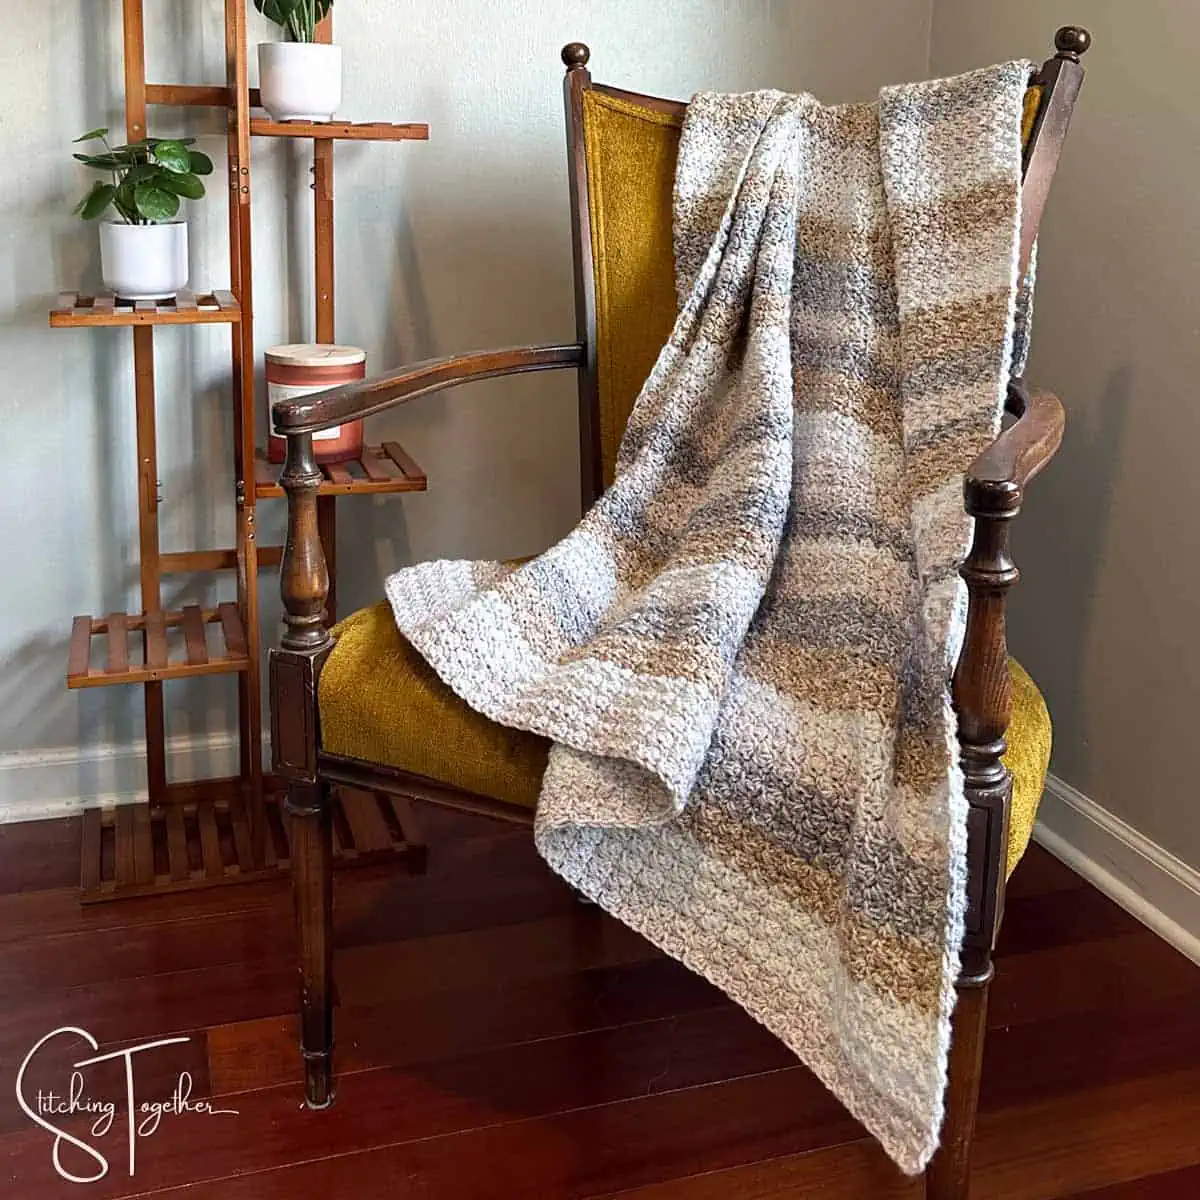 striped crochet suzette stitch blanket draped on the back of a yellow chair